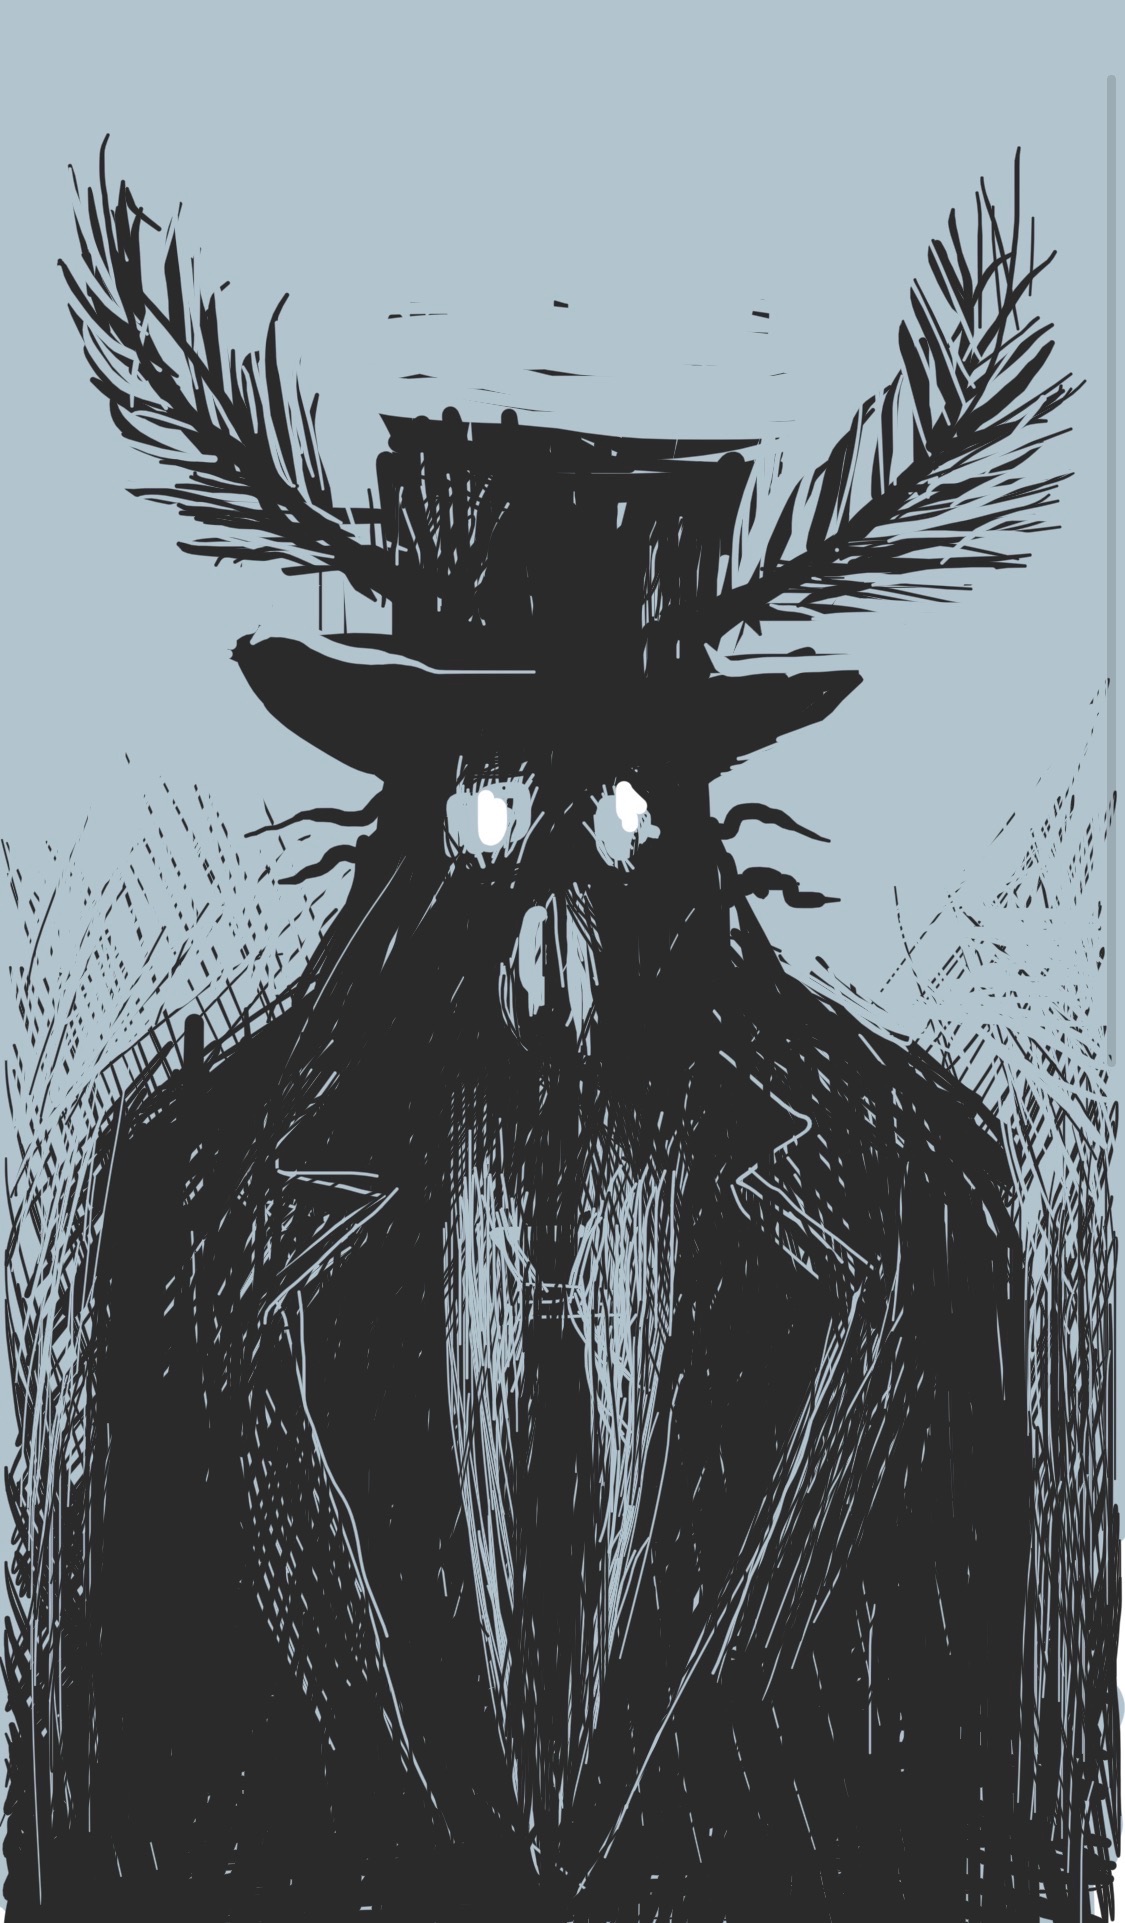 A suited figure with the face and antennae of a moth, as well as—absurdly—a top hat